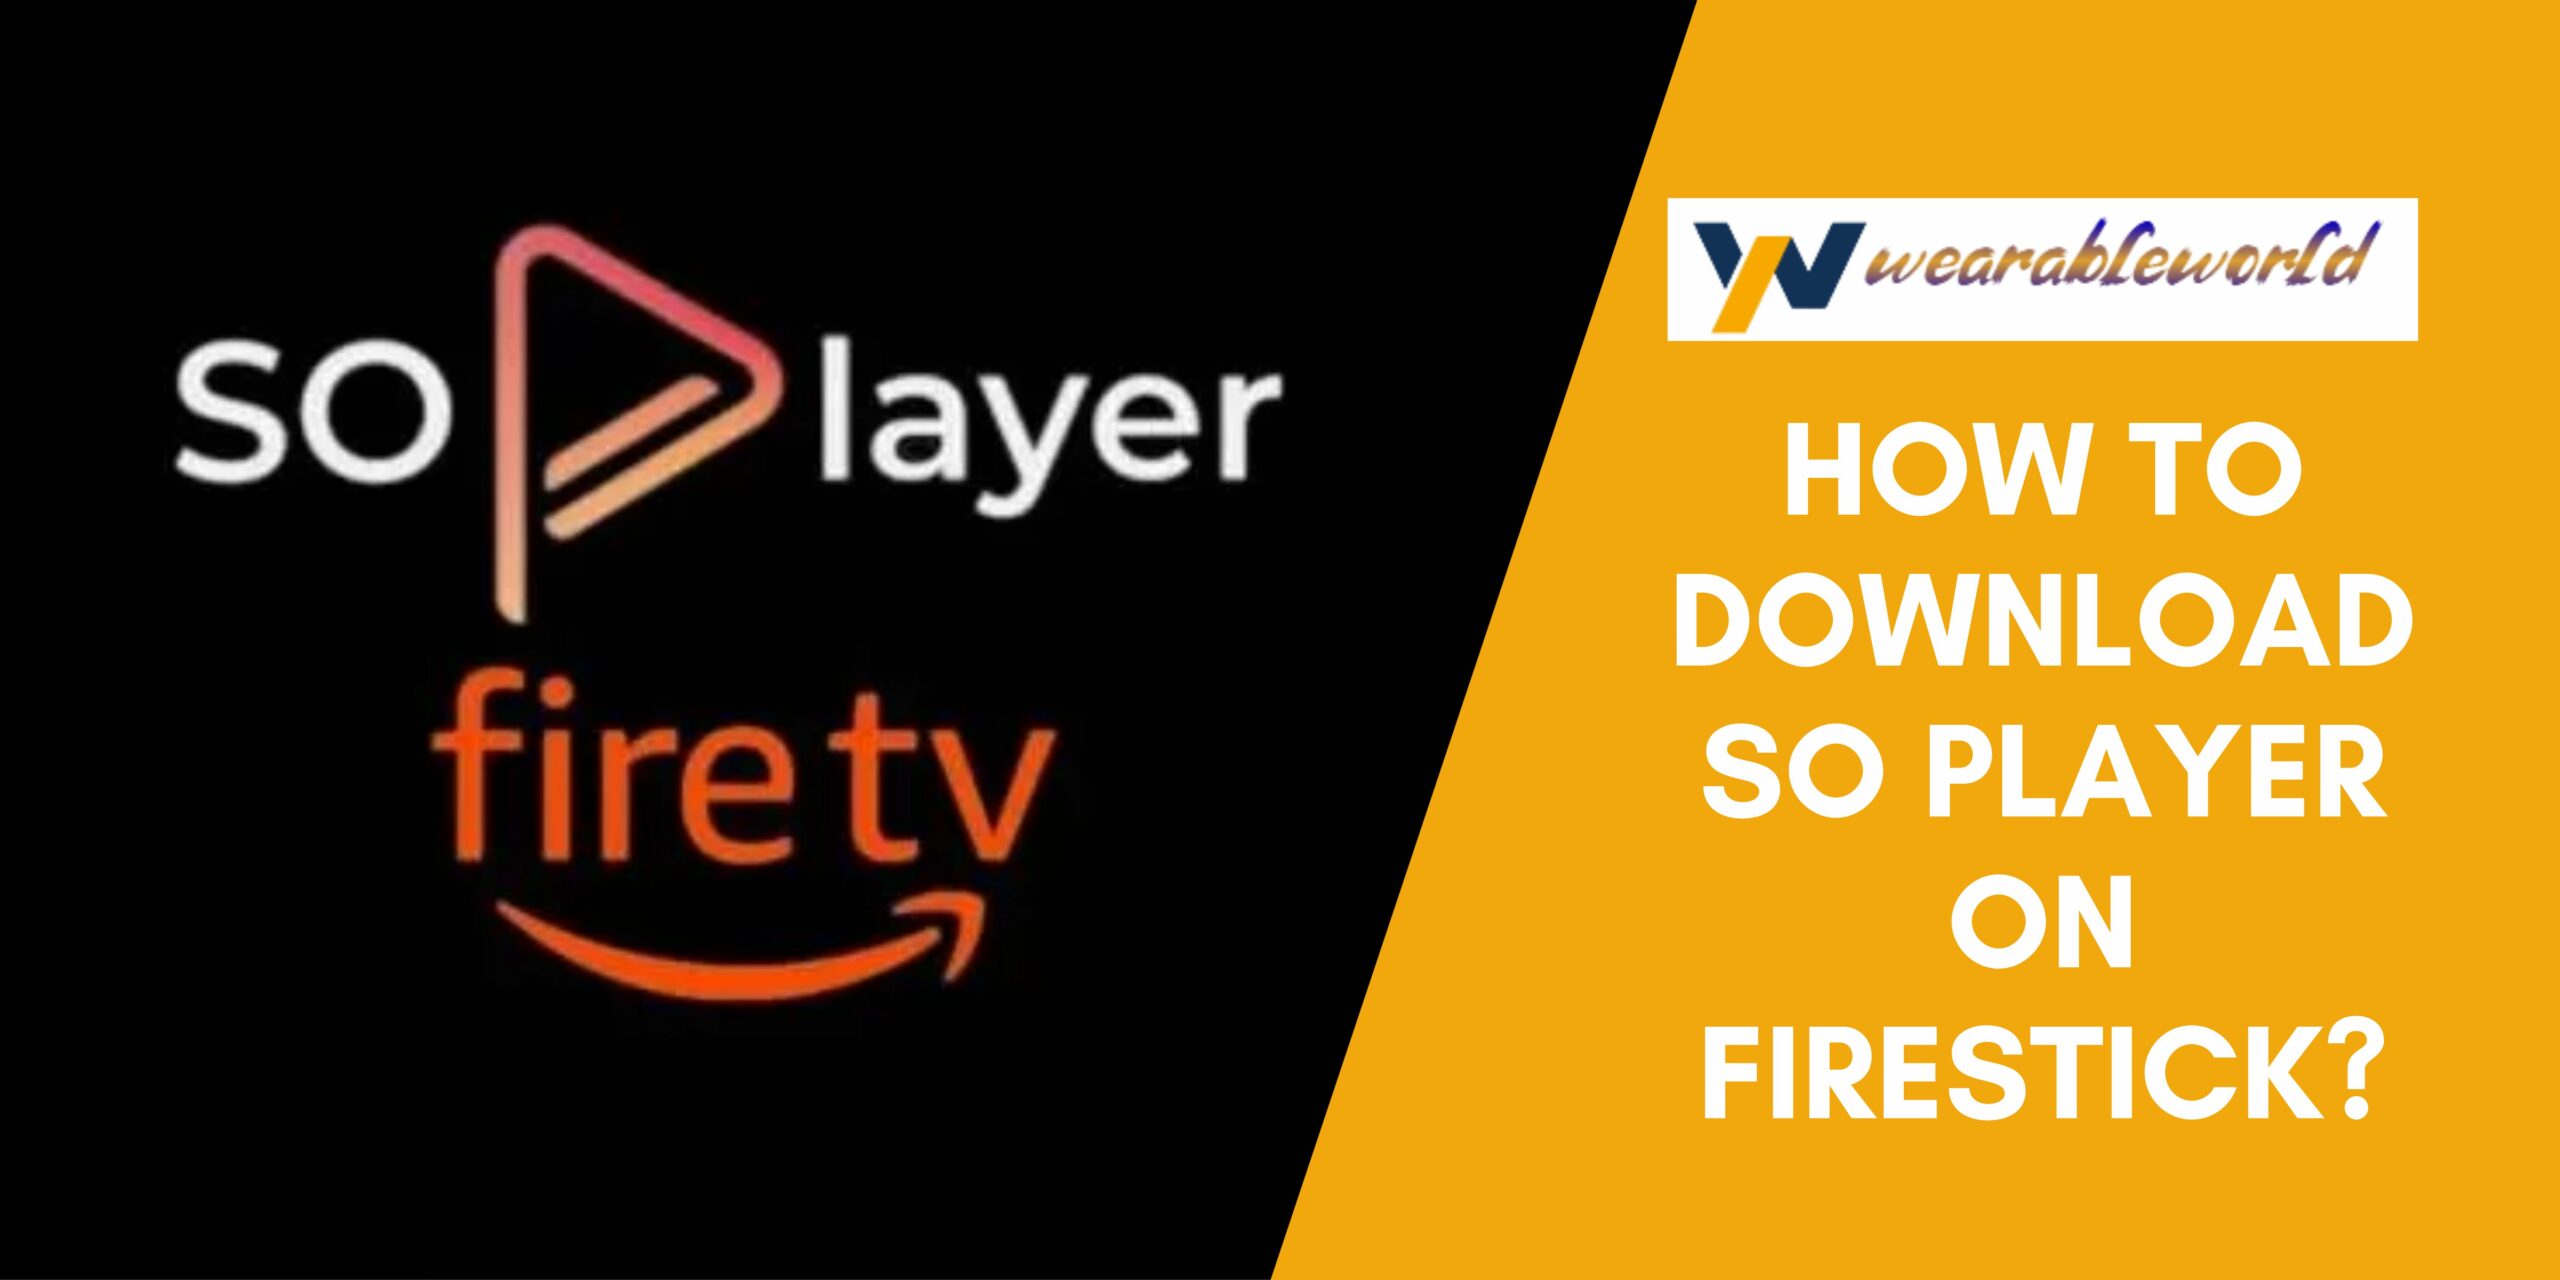 How to Download SO Player on Firestick